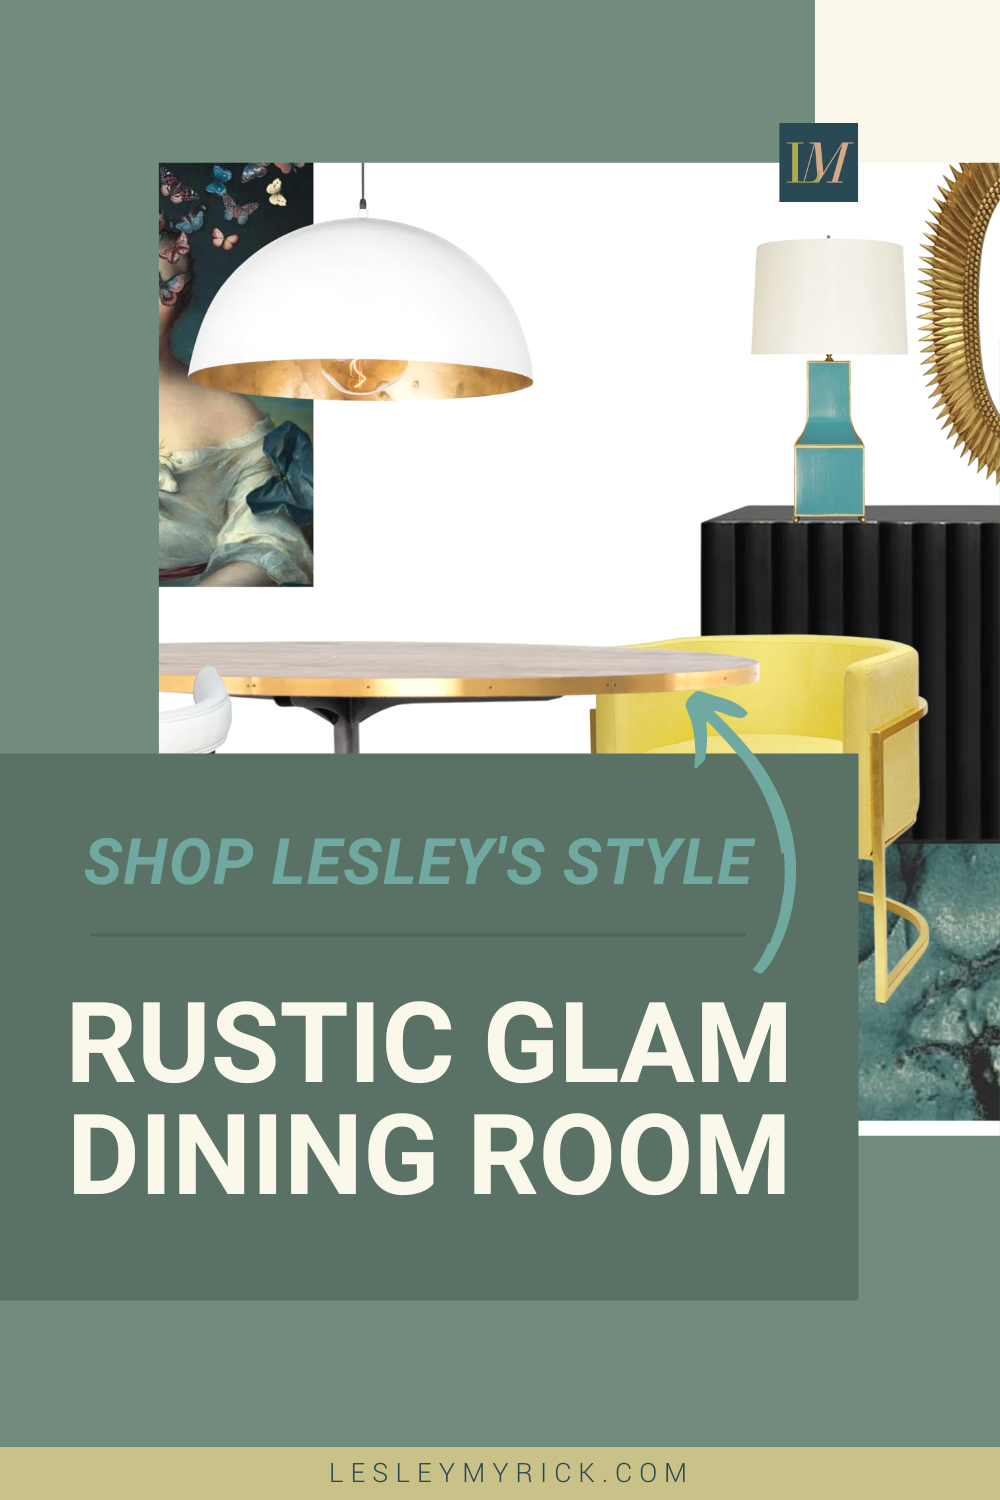 Shop this rustic glam dining room design by Atlanta luxury interior designer Lesley Myrick. A rustic Midcentury dining table banded in brass is accented by yellow velvet barrel chairs, a teal area rug, a white and brass pendant light, and a black laquered sidevoard.  